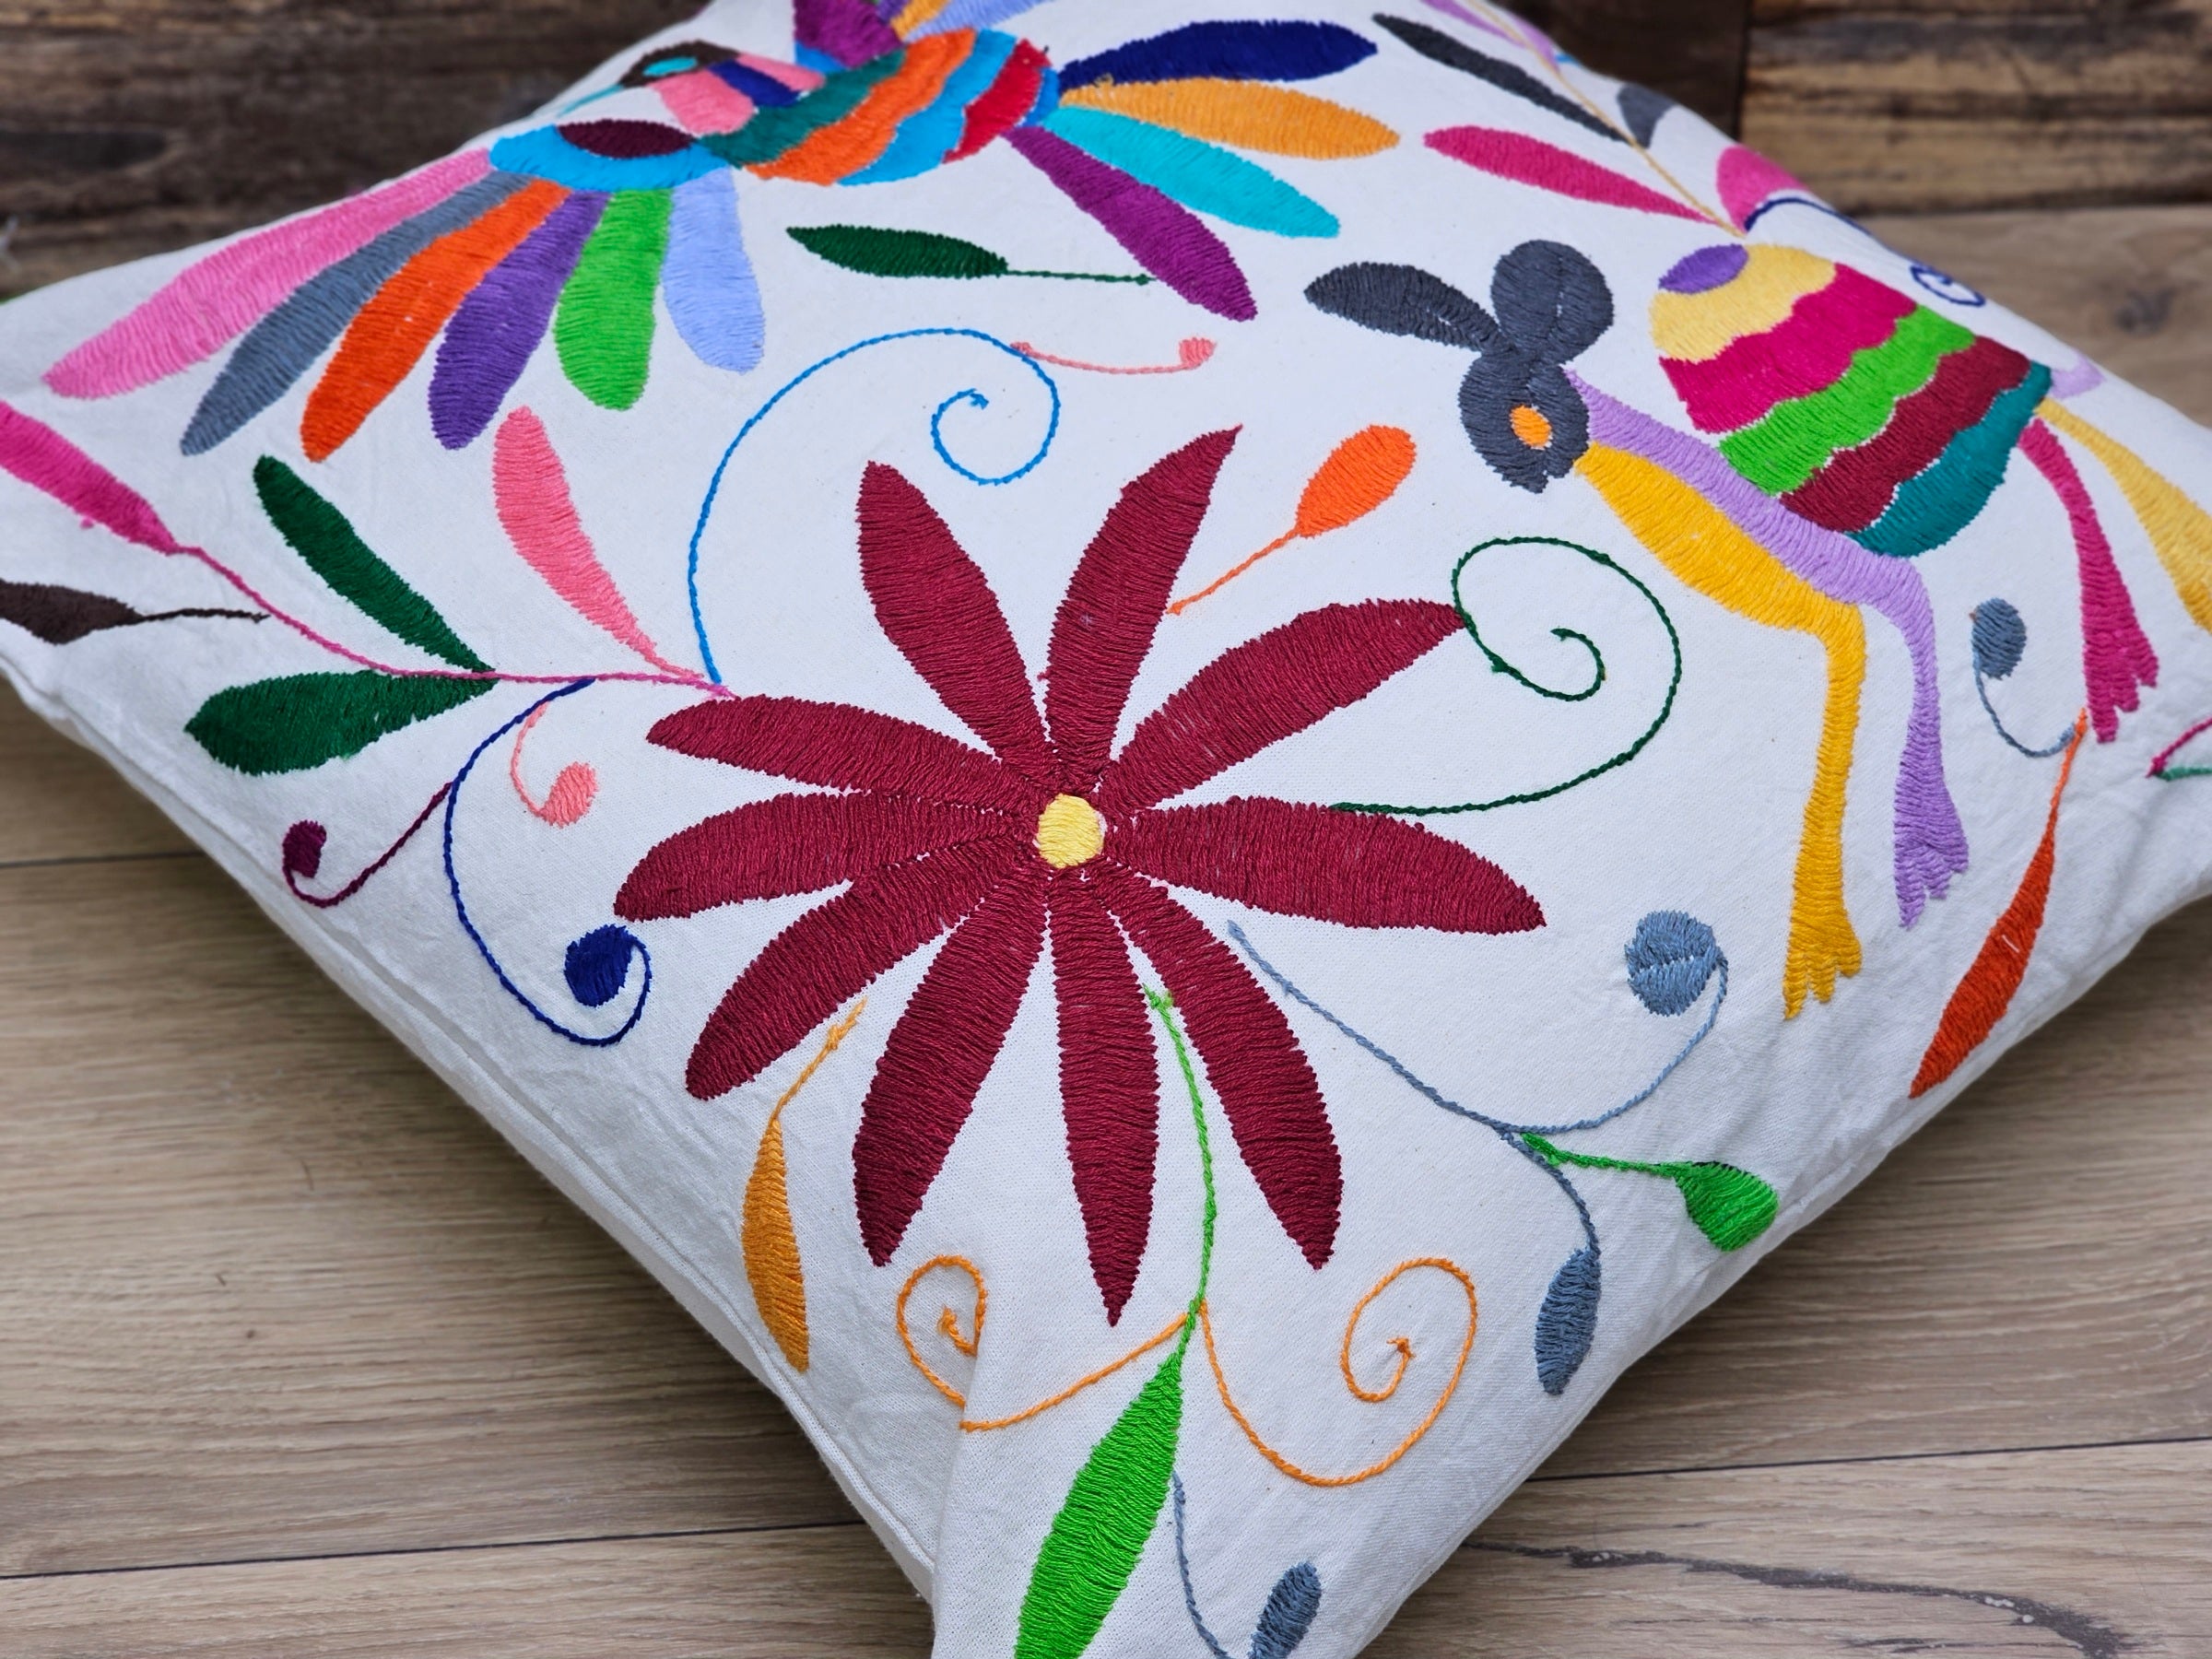 Square Otomi Tenango Pillow Cover with Hand Embroidered Turtle, Bird, and Flower Design in Vibrant Colors. Handmade in Mexico. Ships from the USA. Buy now at www.felipeandgrace.com.